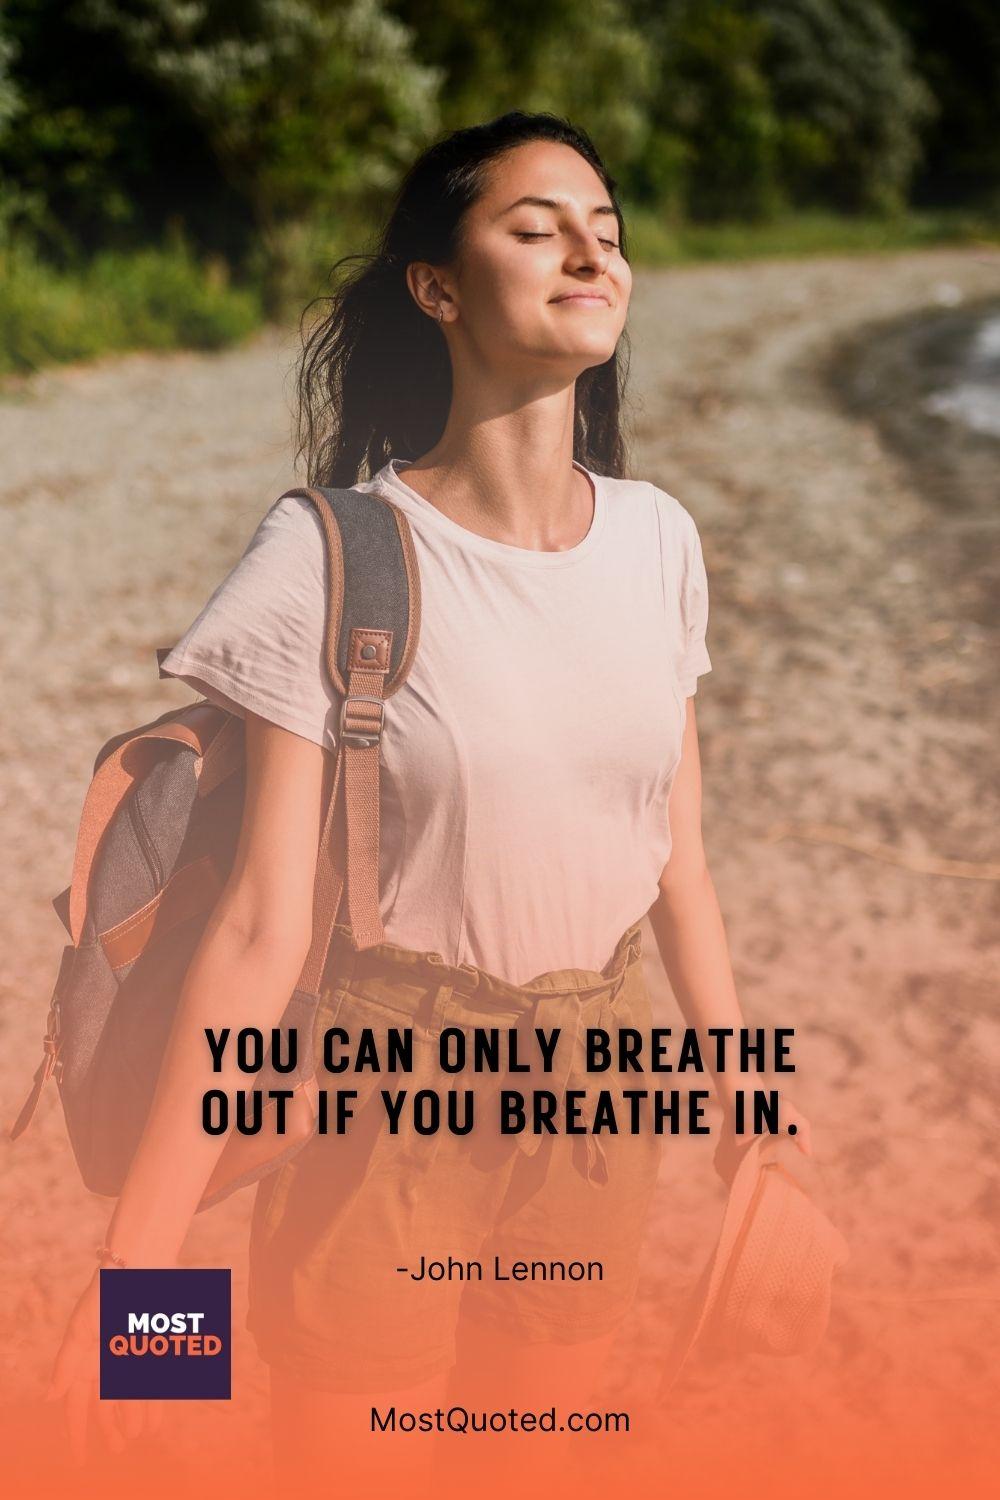 You can only breathe out if you breathe in. - John Lennon